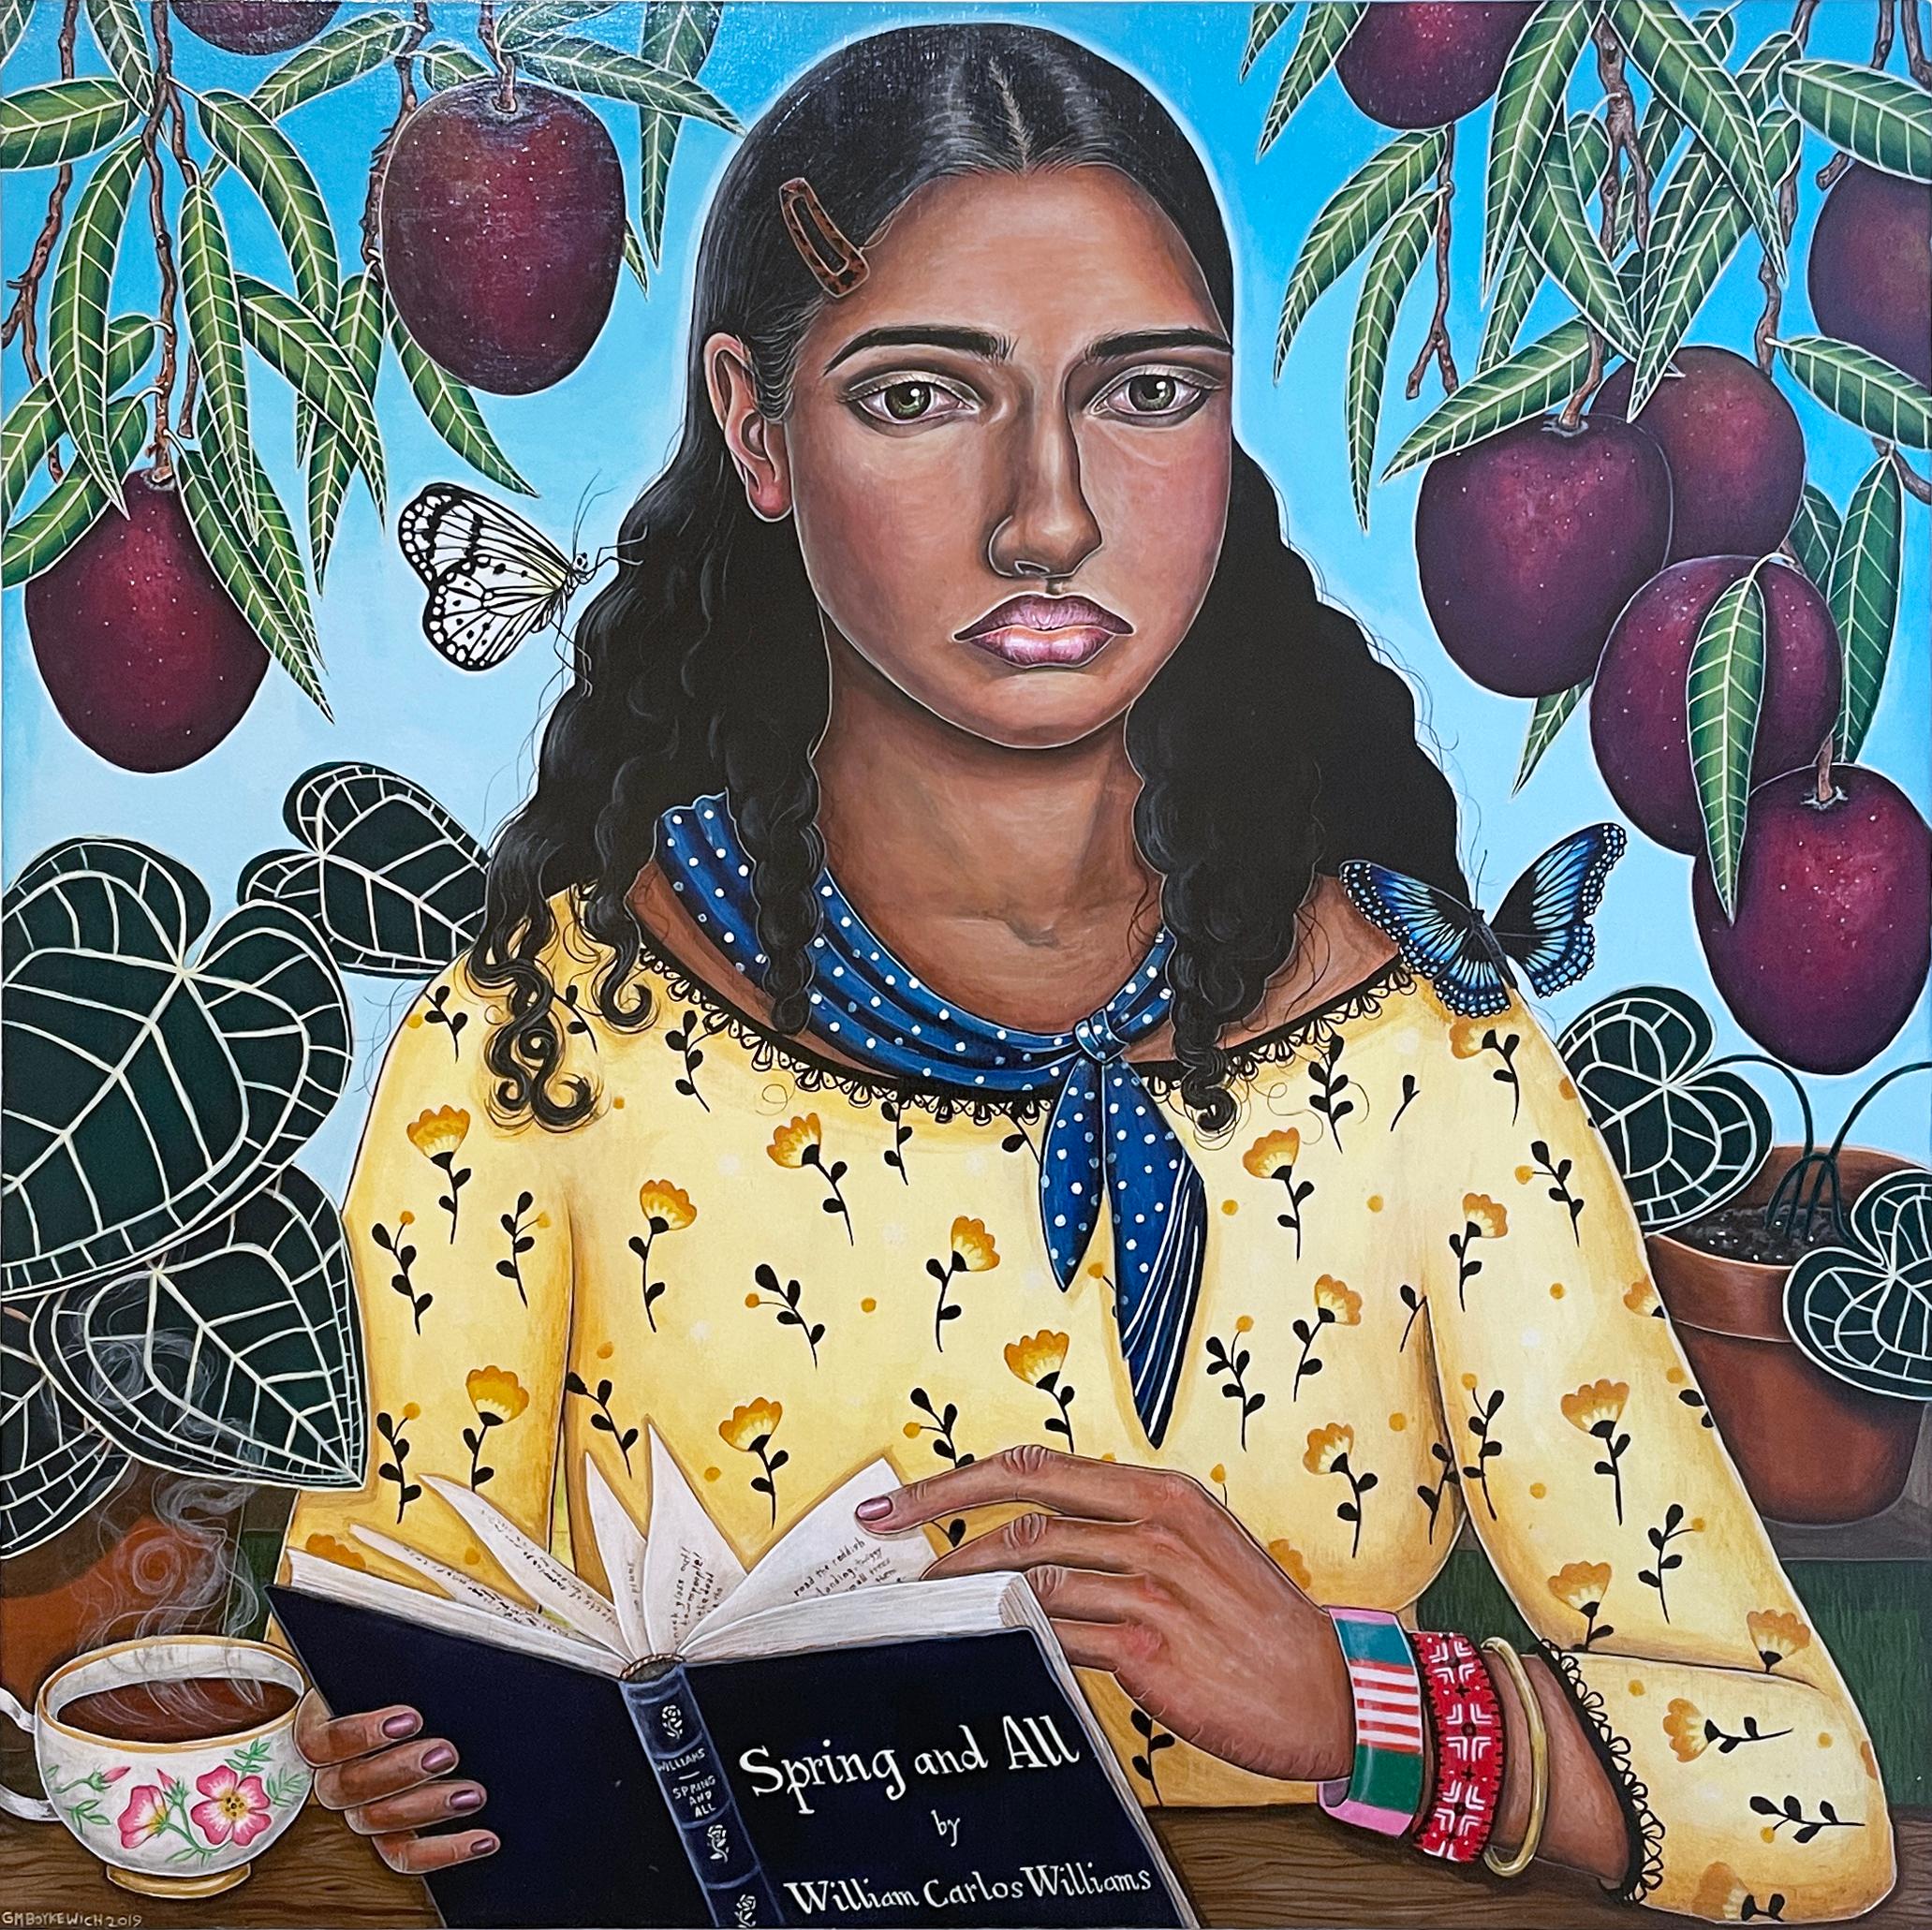 Gail M. Boykewich Portrait Painting - Spring and All (2019) square figurative painting, woman, fruit tree, plants, tea